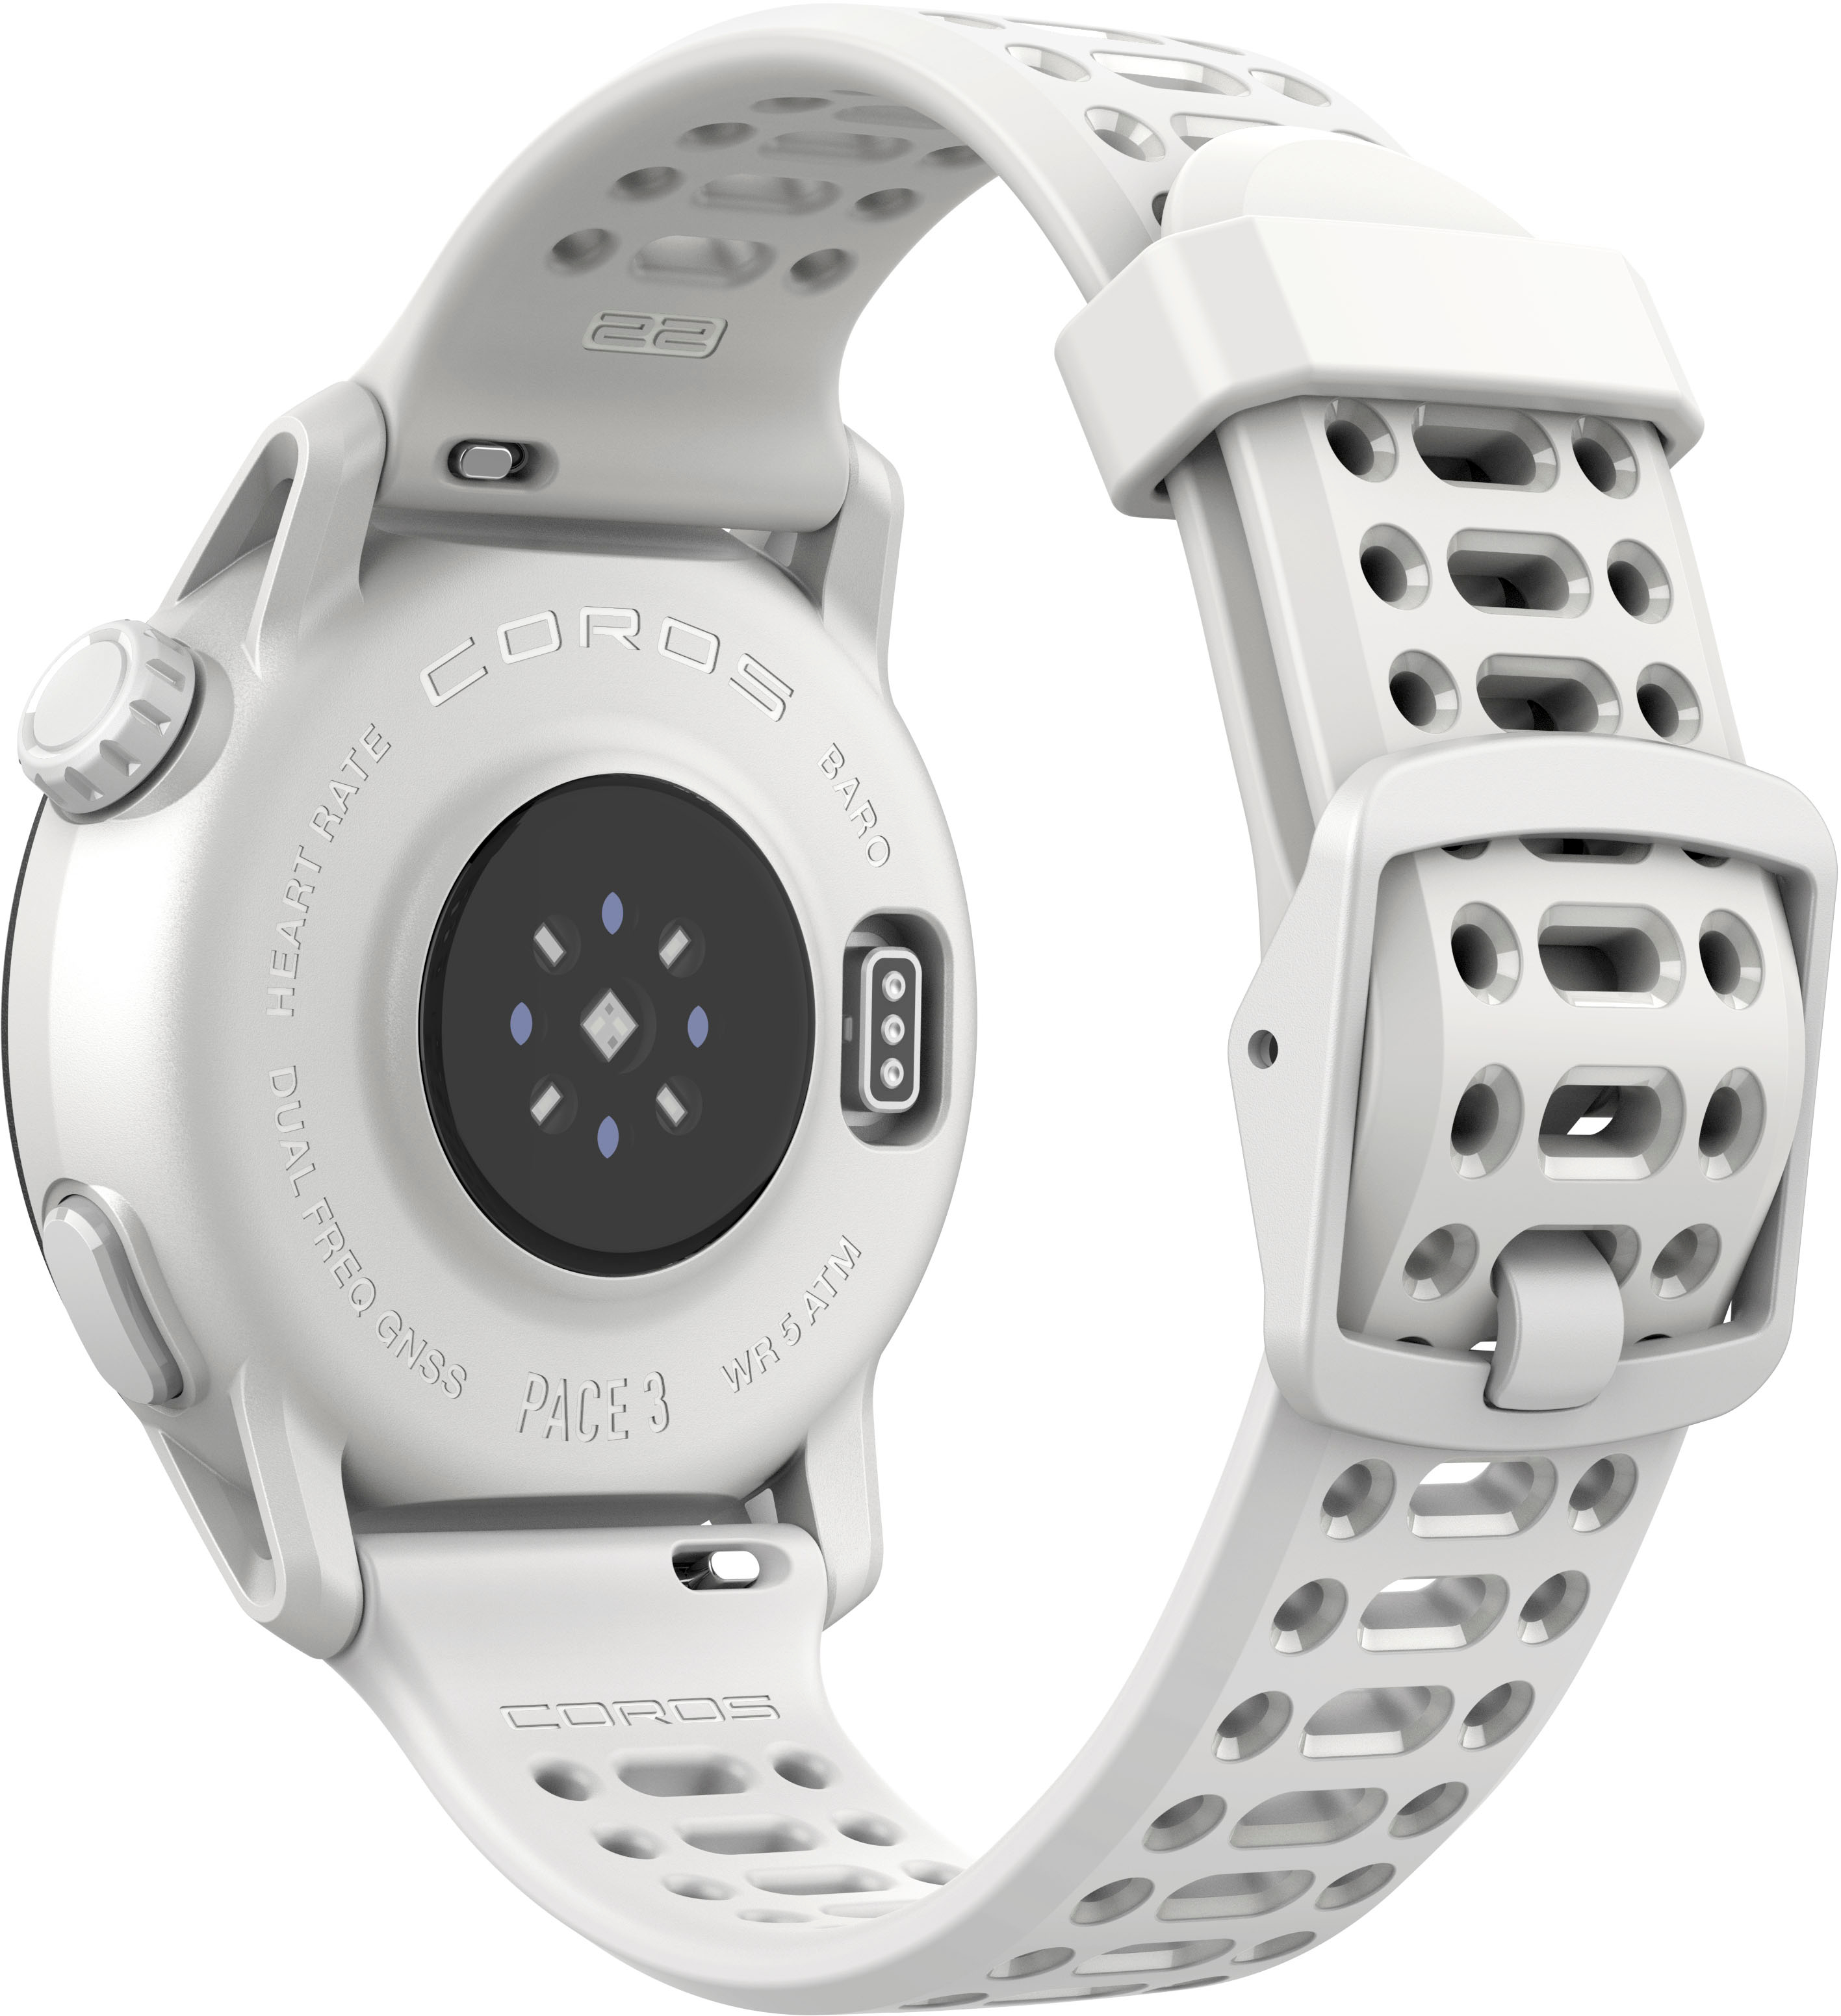 COROS PACE 3 GPS Sport Watch White WPACE3-WHT - Best Buy